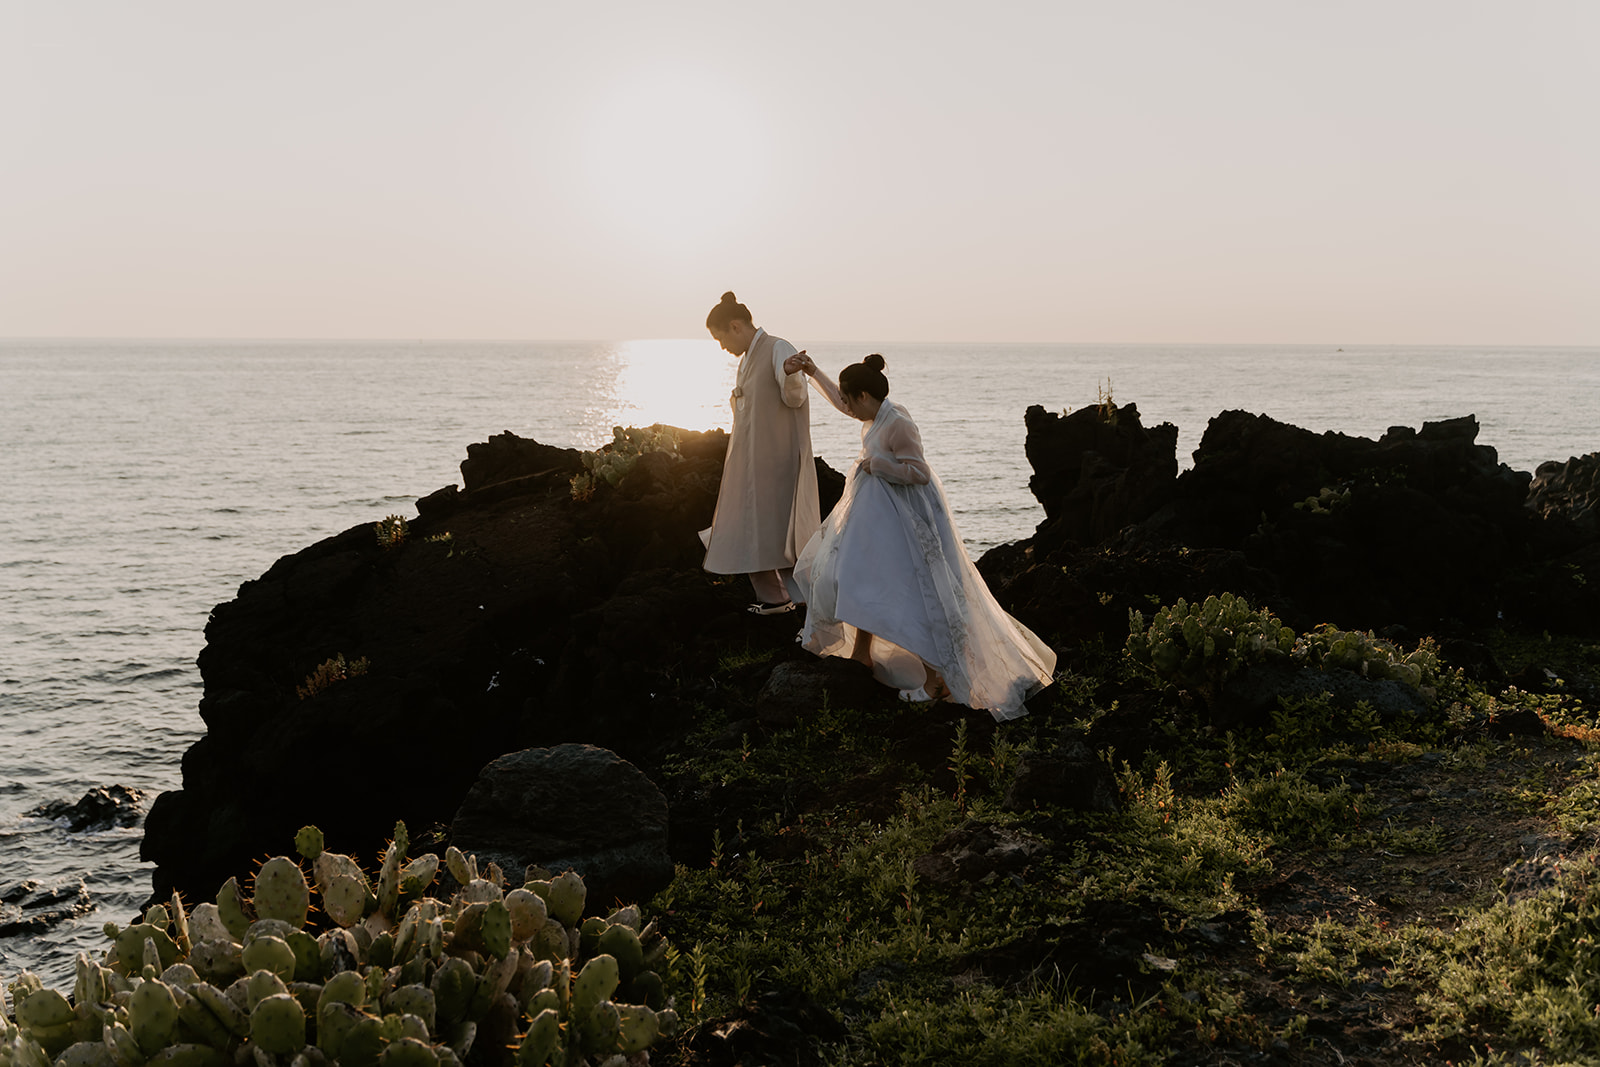 A pre-wedding couple standing on a rocky cliff overlooking the ocean in Korea.